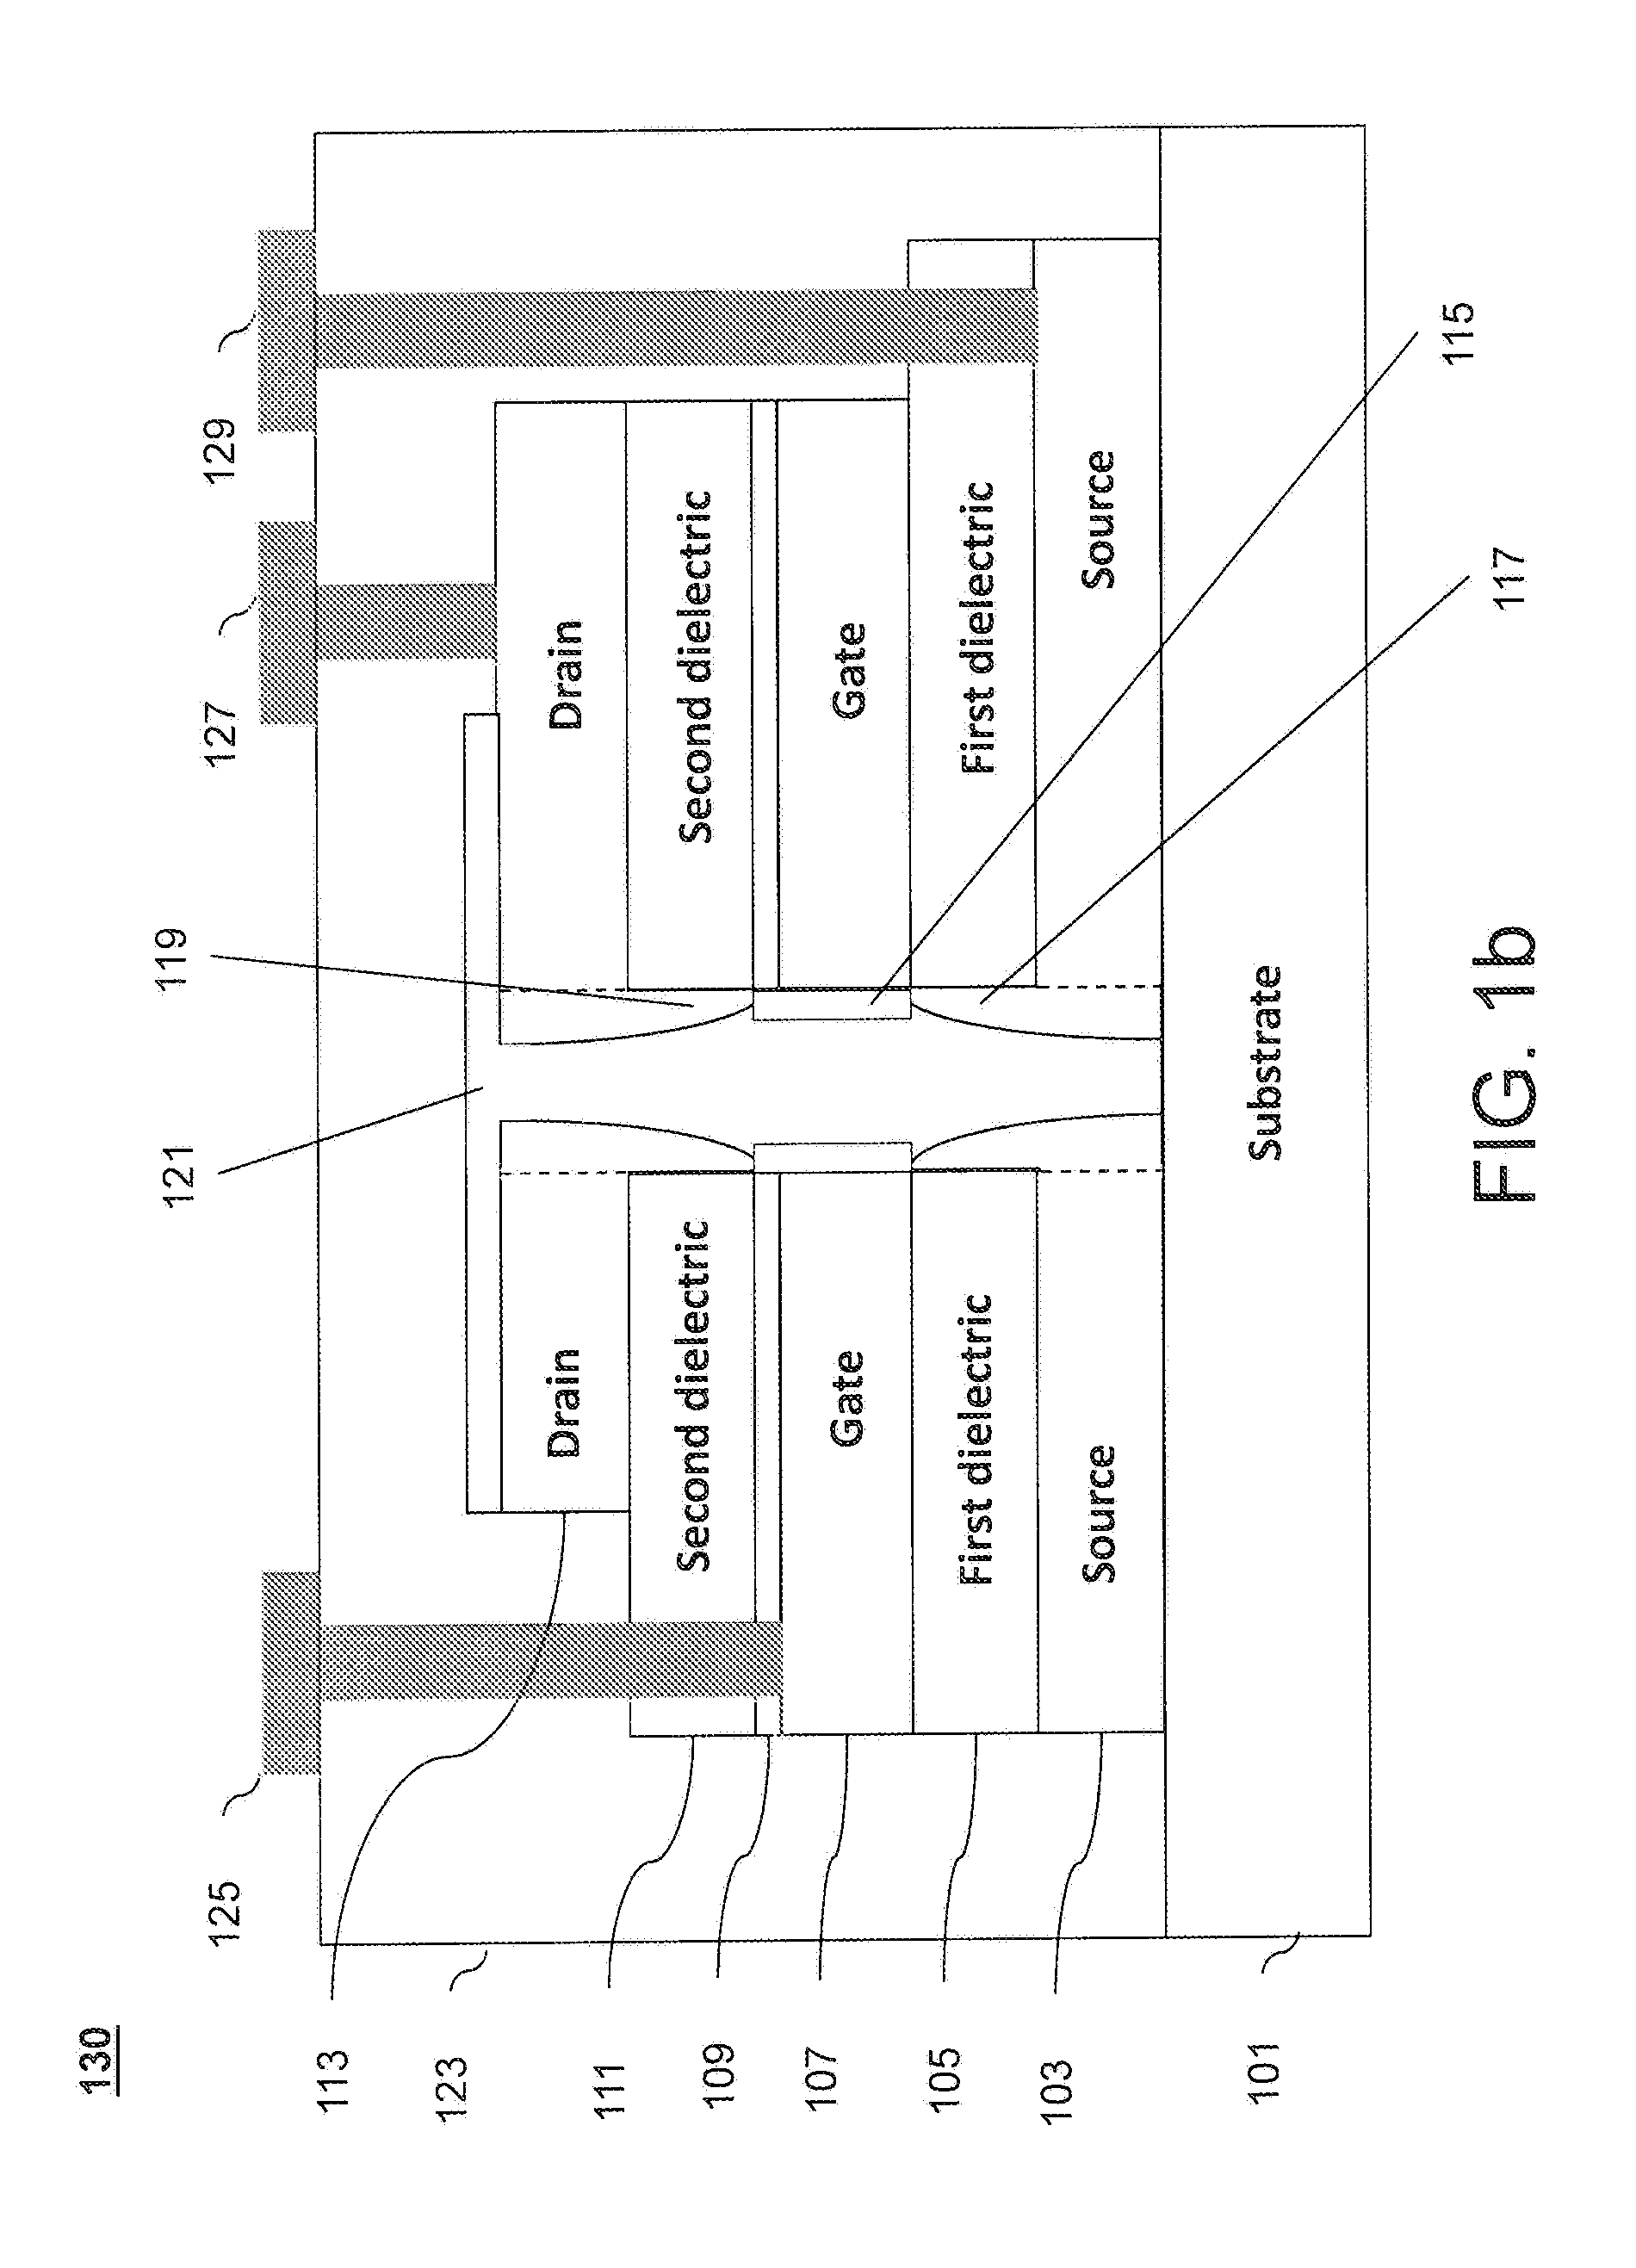 Semiconductor device with a vertical channel